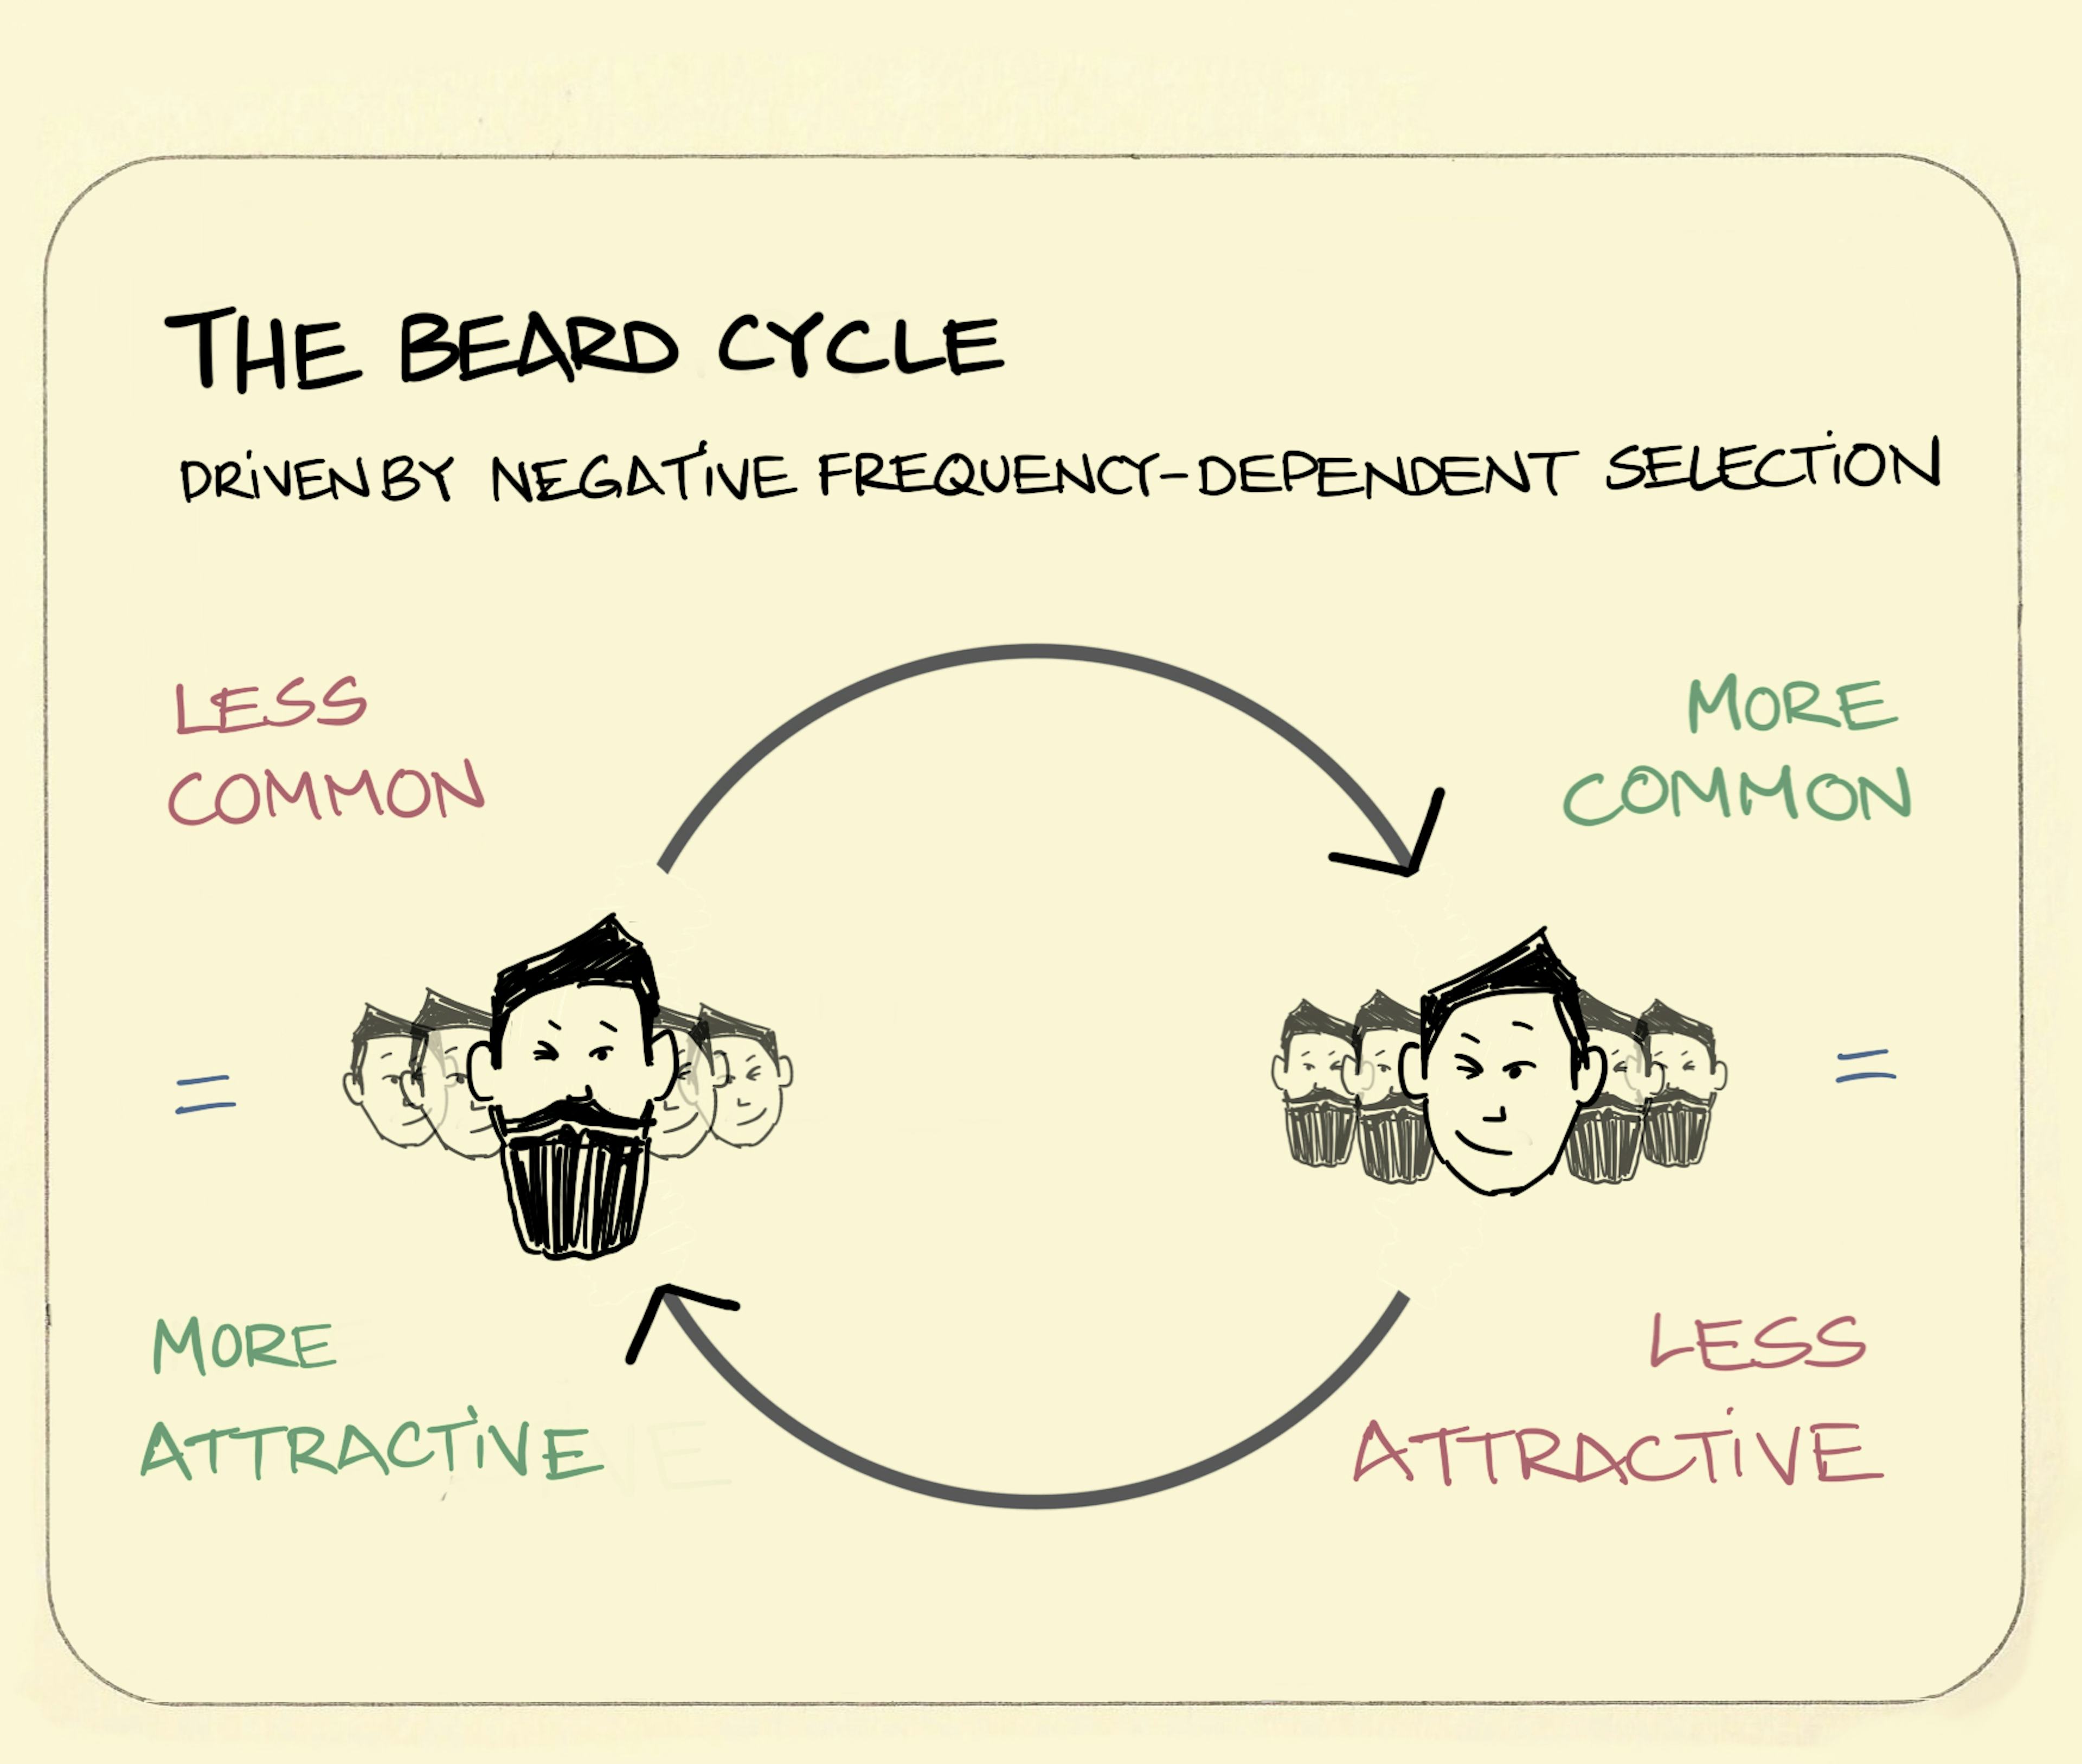 The beard cycle illustration: a virtuous circle is shown where beards being rare in society (on the left) makes them more desirable which leads to beards becoming more common in society (on the right), making them less desirable, which leads to fewer beards again. And so on...   